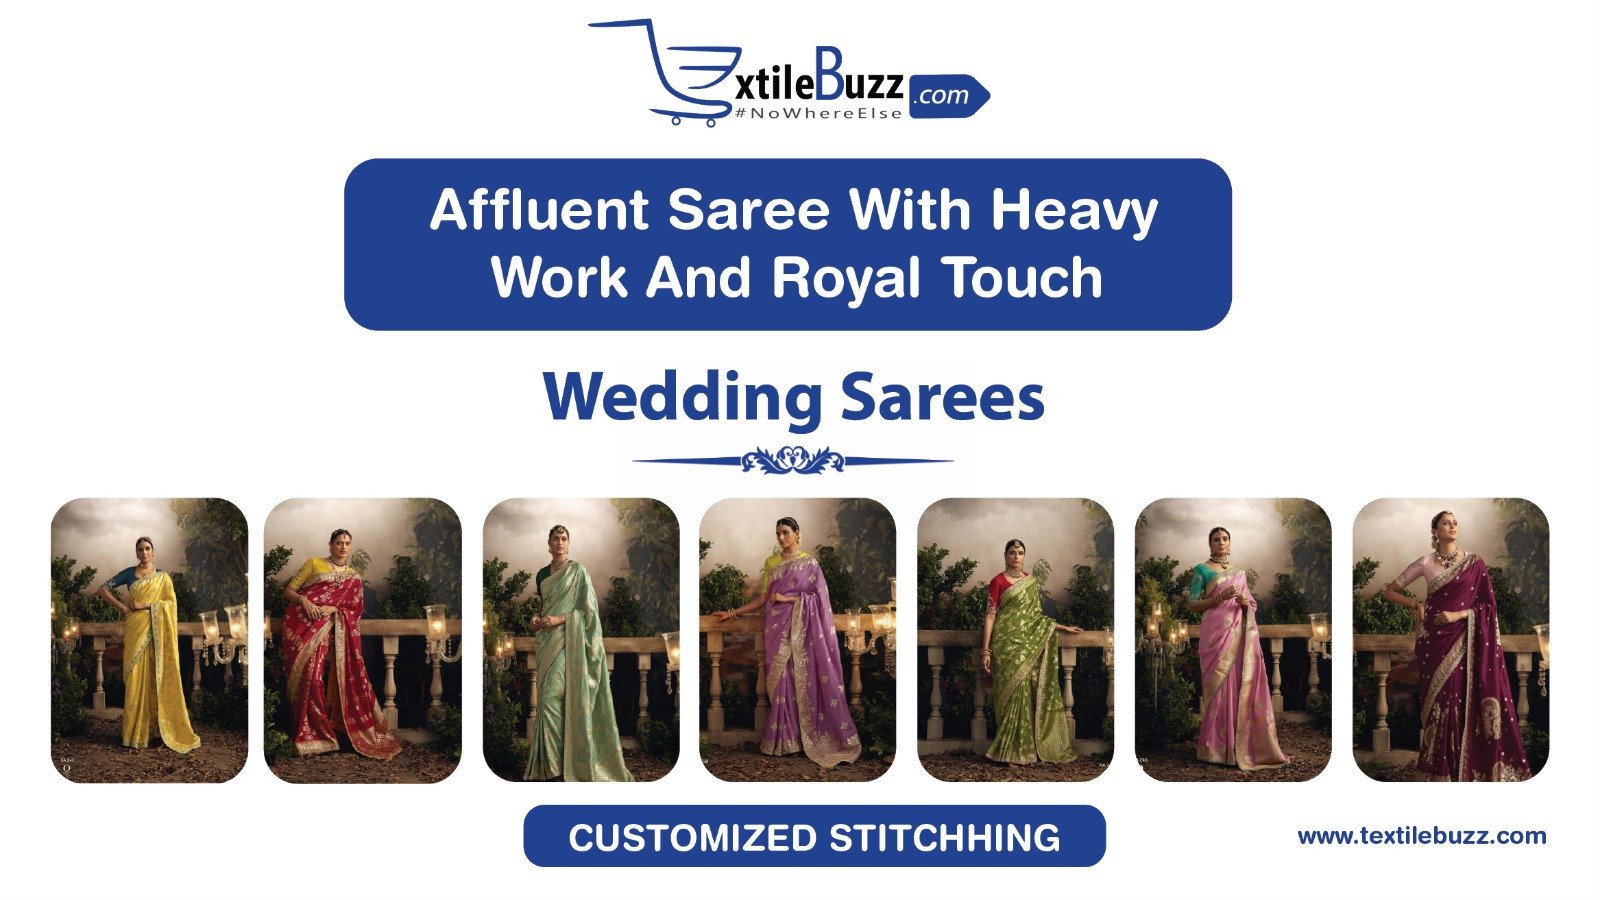 Wedding Saree- Affluent Saree With Heavy Work And Royal Touch